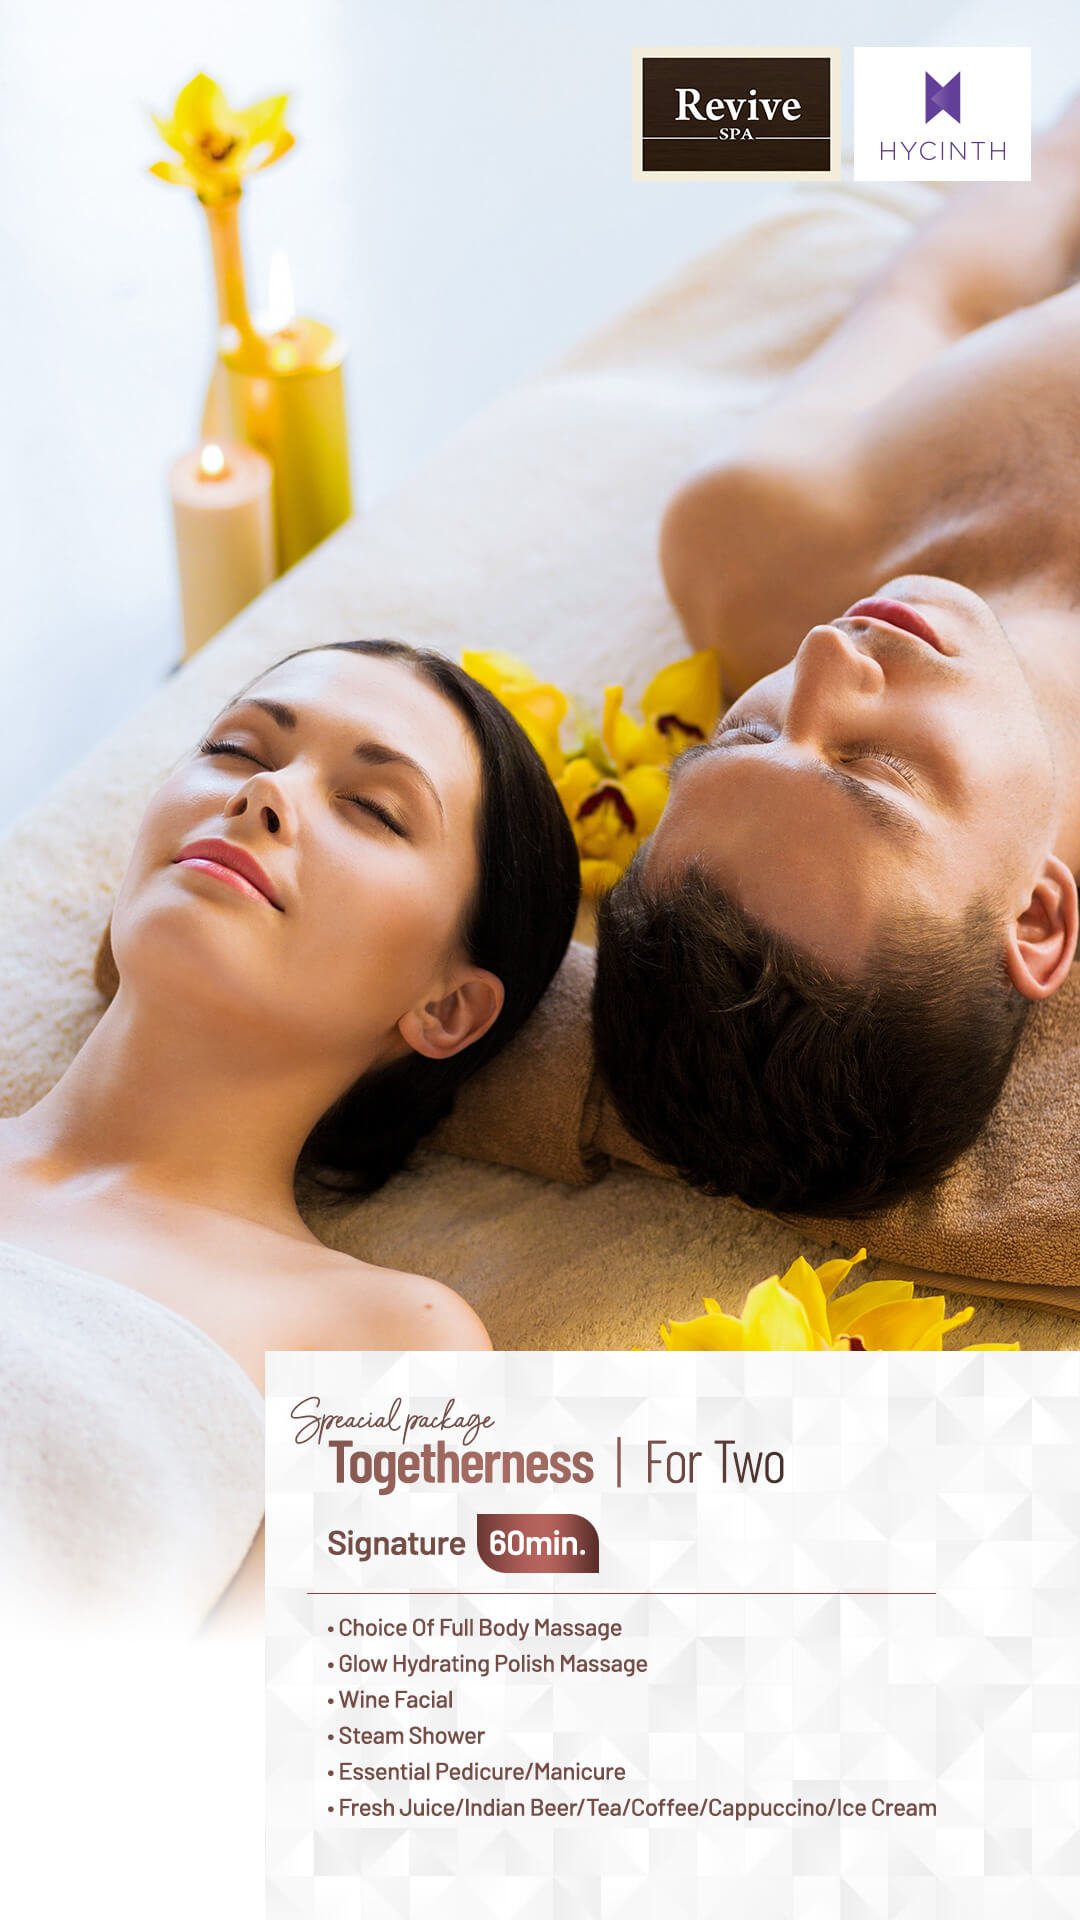 Revice SPA | HYCINTH - Special Package Togetherness for Two Signature